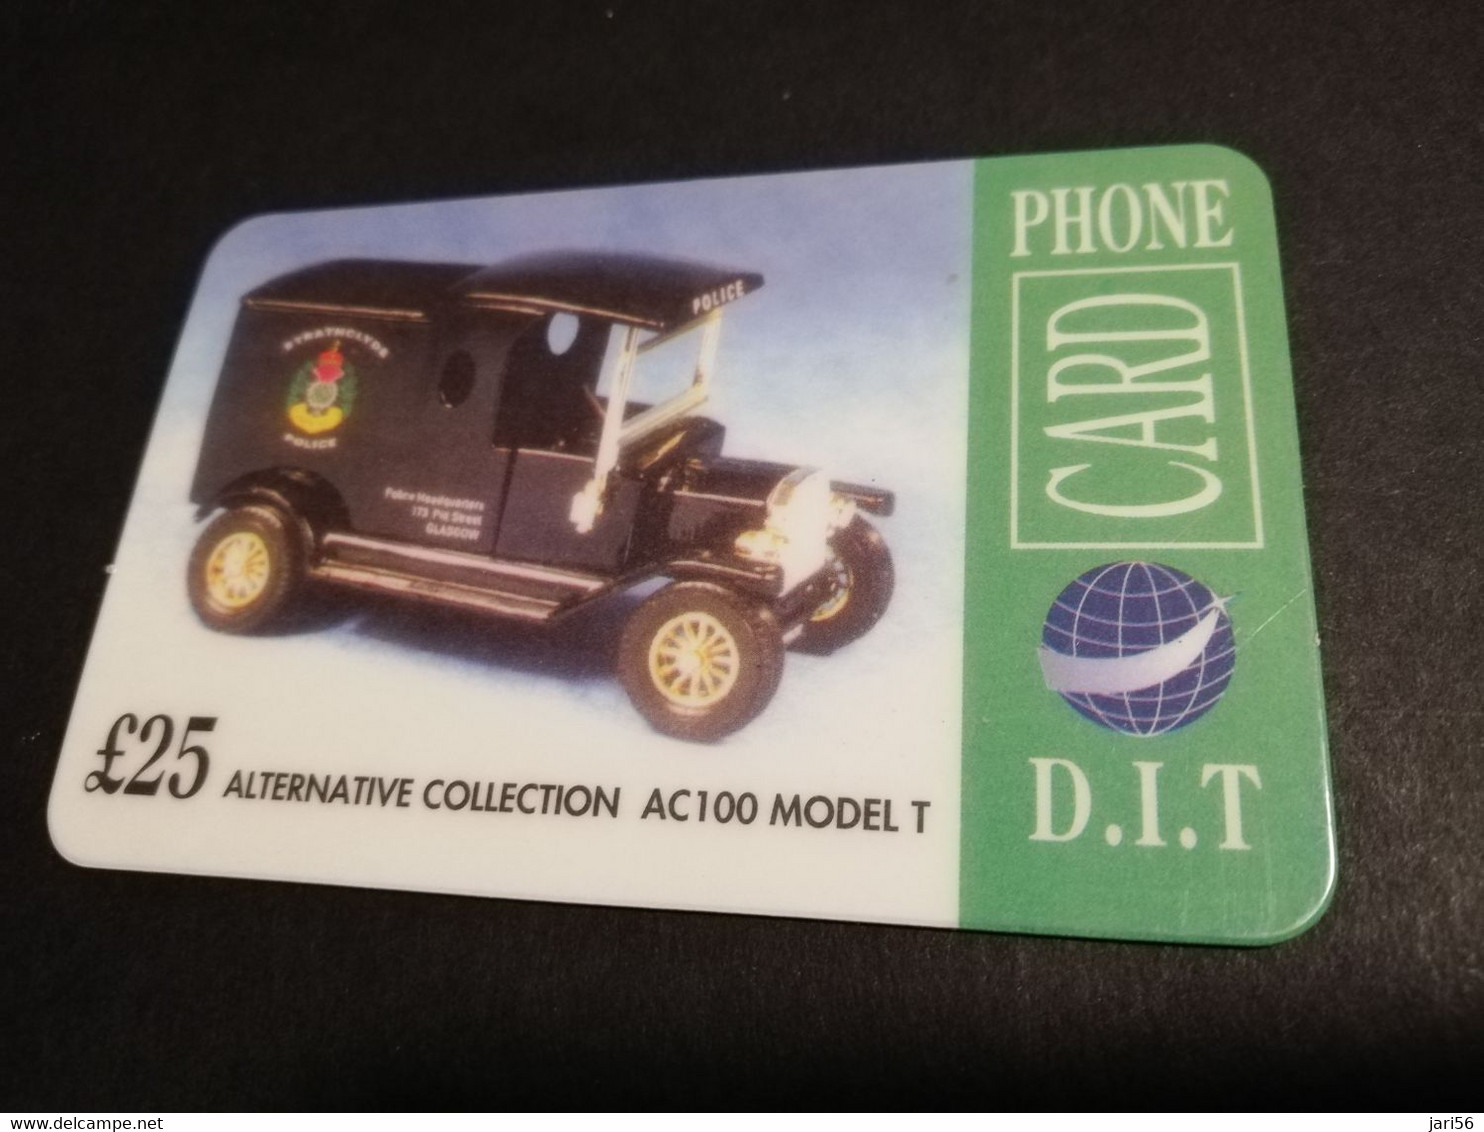 GREAT BRITAIN   25 POUND  AIR PLANES   CAR/ RENAULT AC 100 MODEL T  DIT PHONECARD    PREPAID CARD      **5903** - Collections